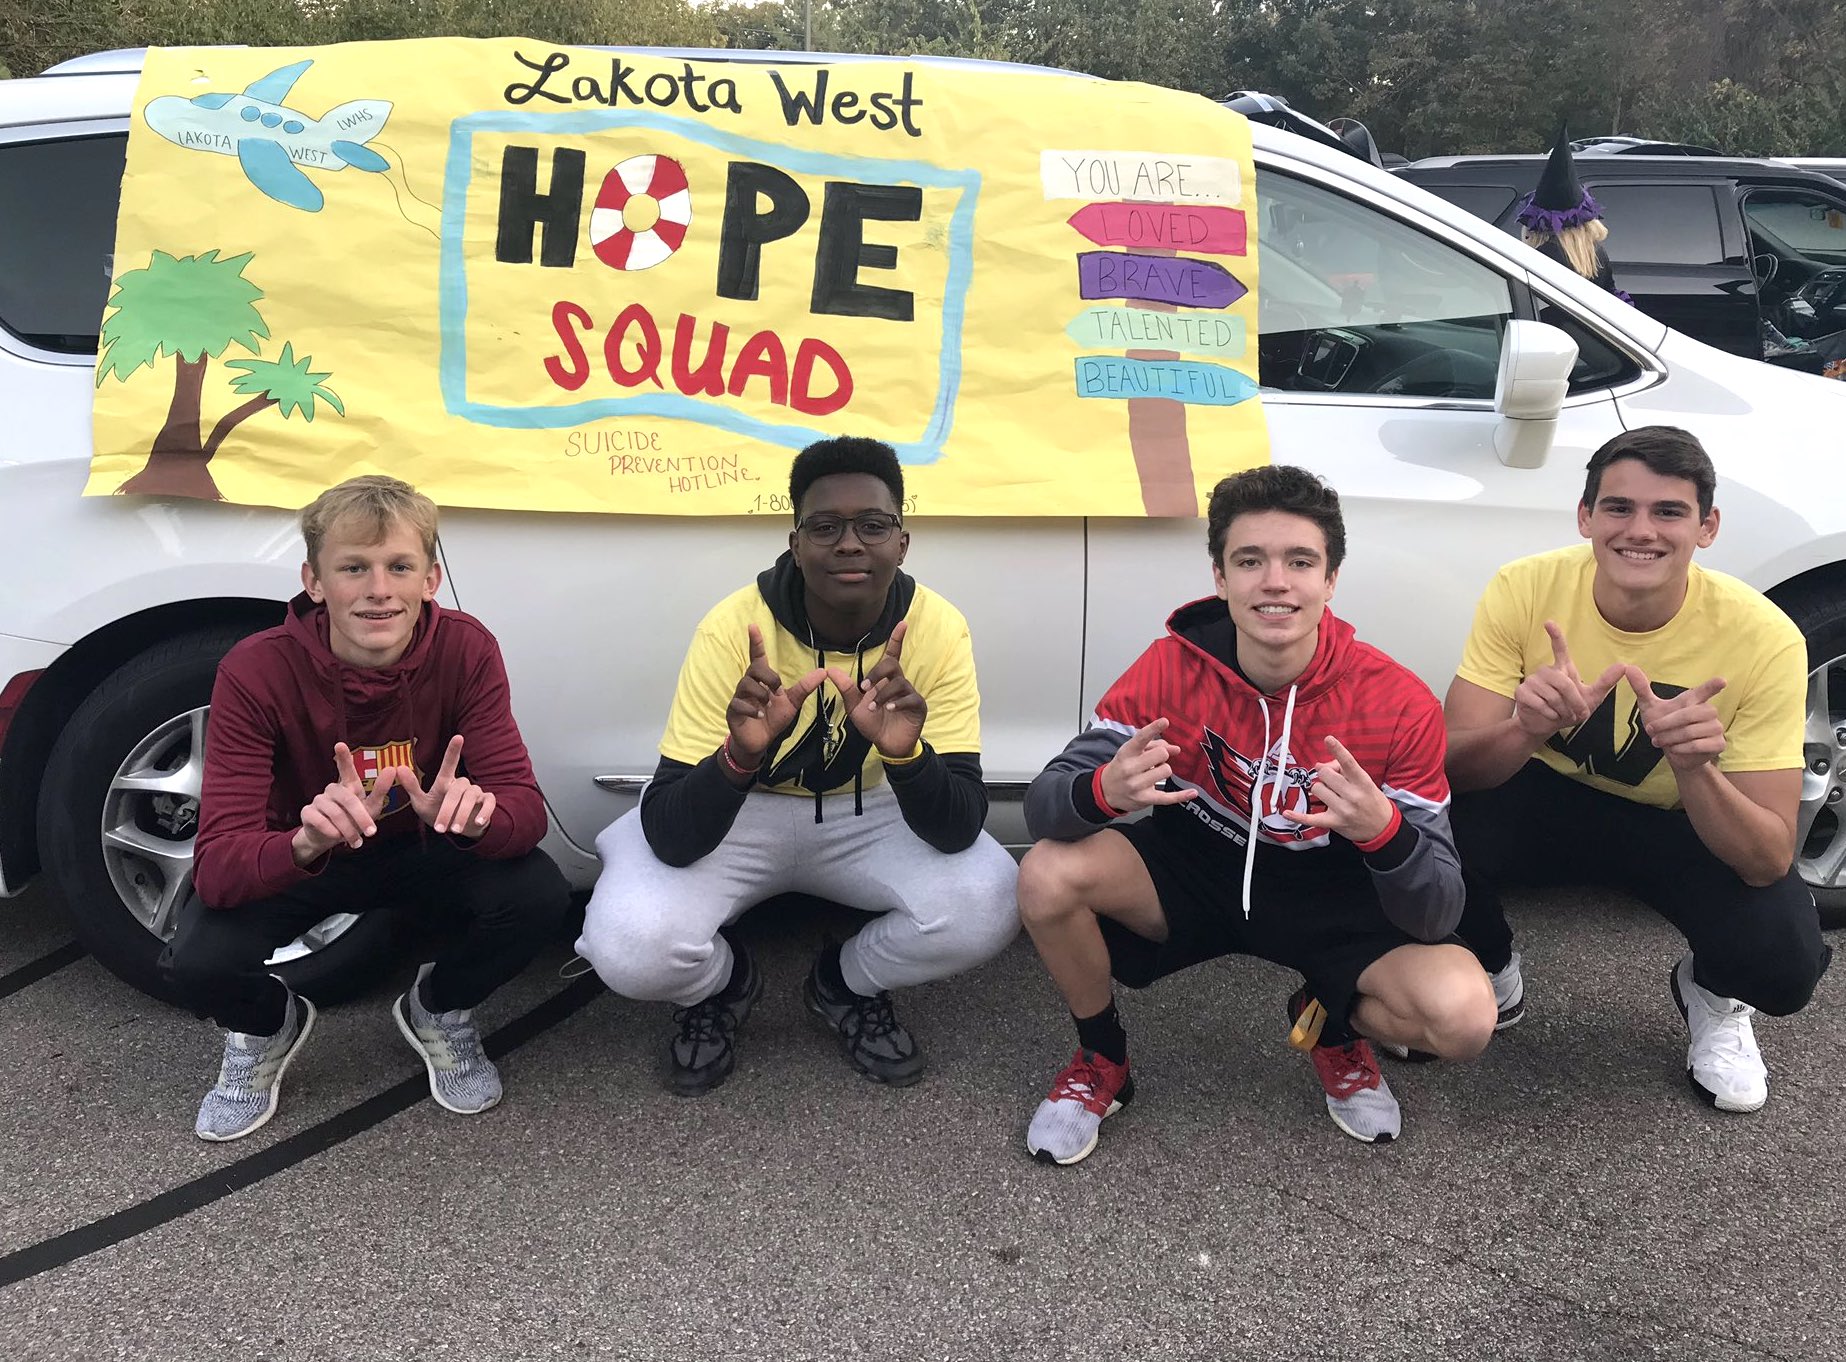 Hope Squad training focuses on dispelling the myth that talking about suicide can give students ideas about harming themselves.